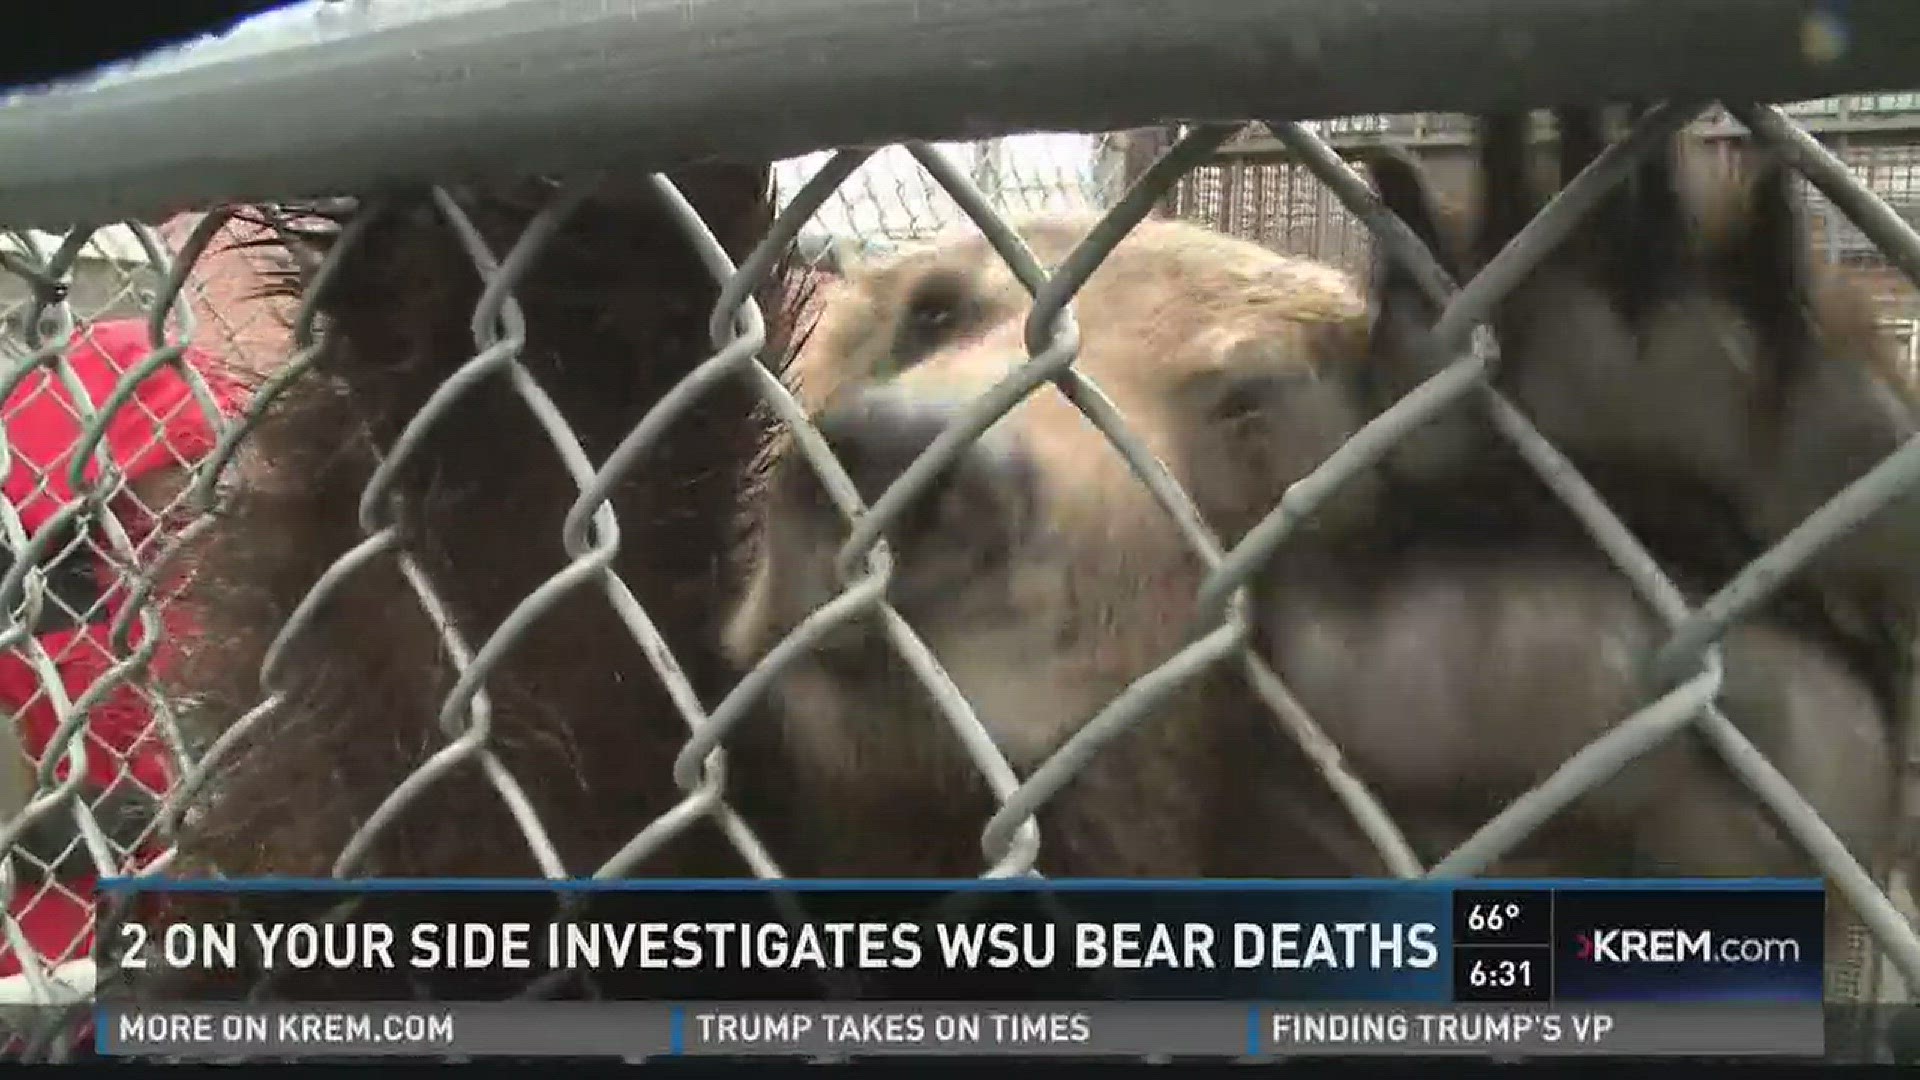 An internal investigation was launched after a series of problems, including the death of two cubs that were supposed to be hibernating.